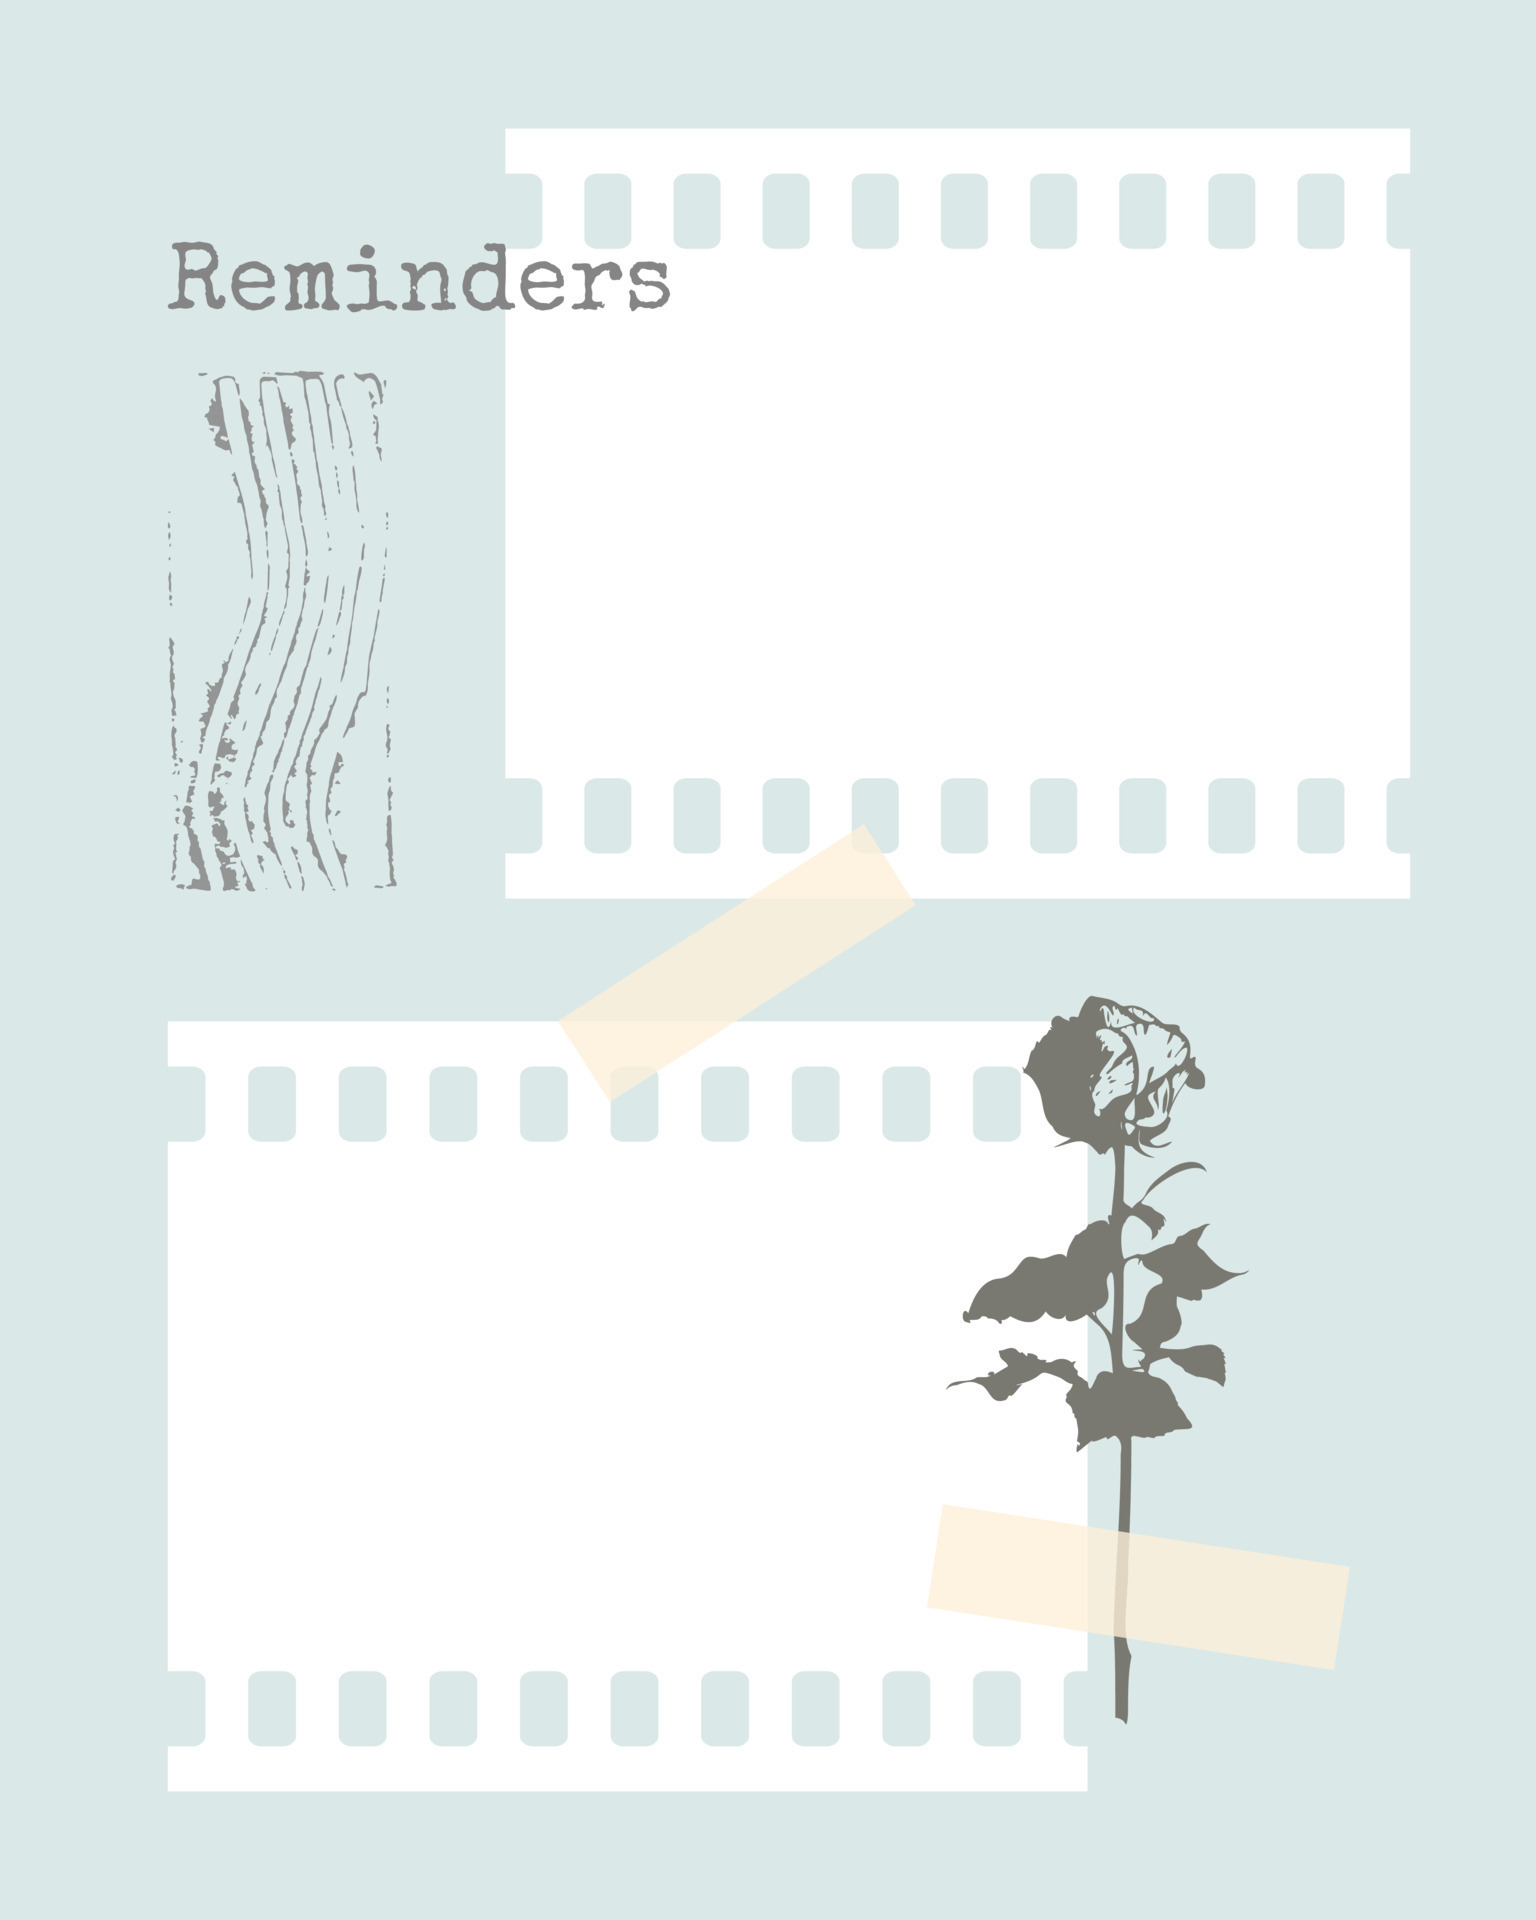 To-do list wallpaper - designed, printed by Deborah Bowness